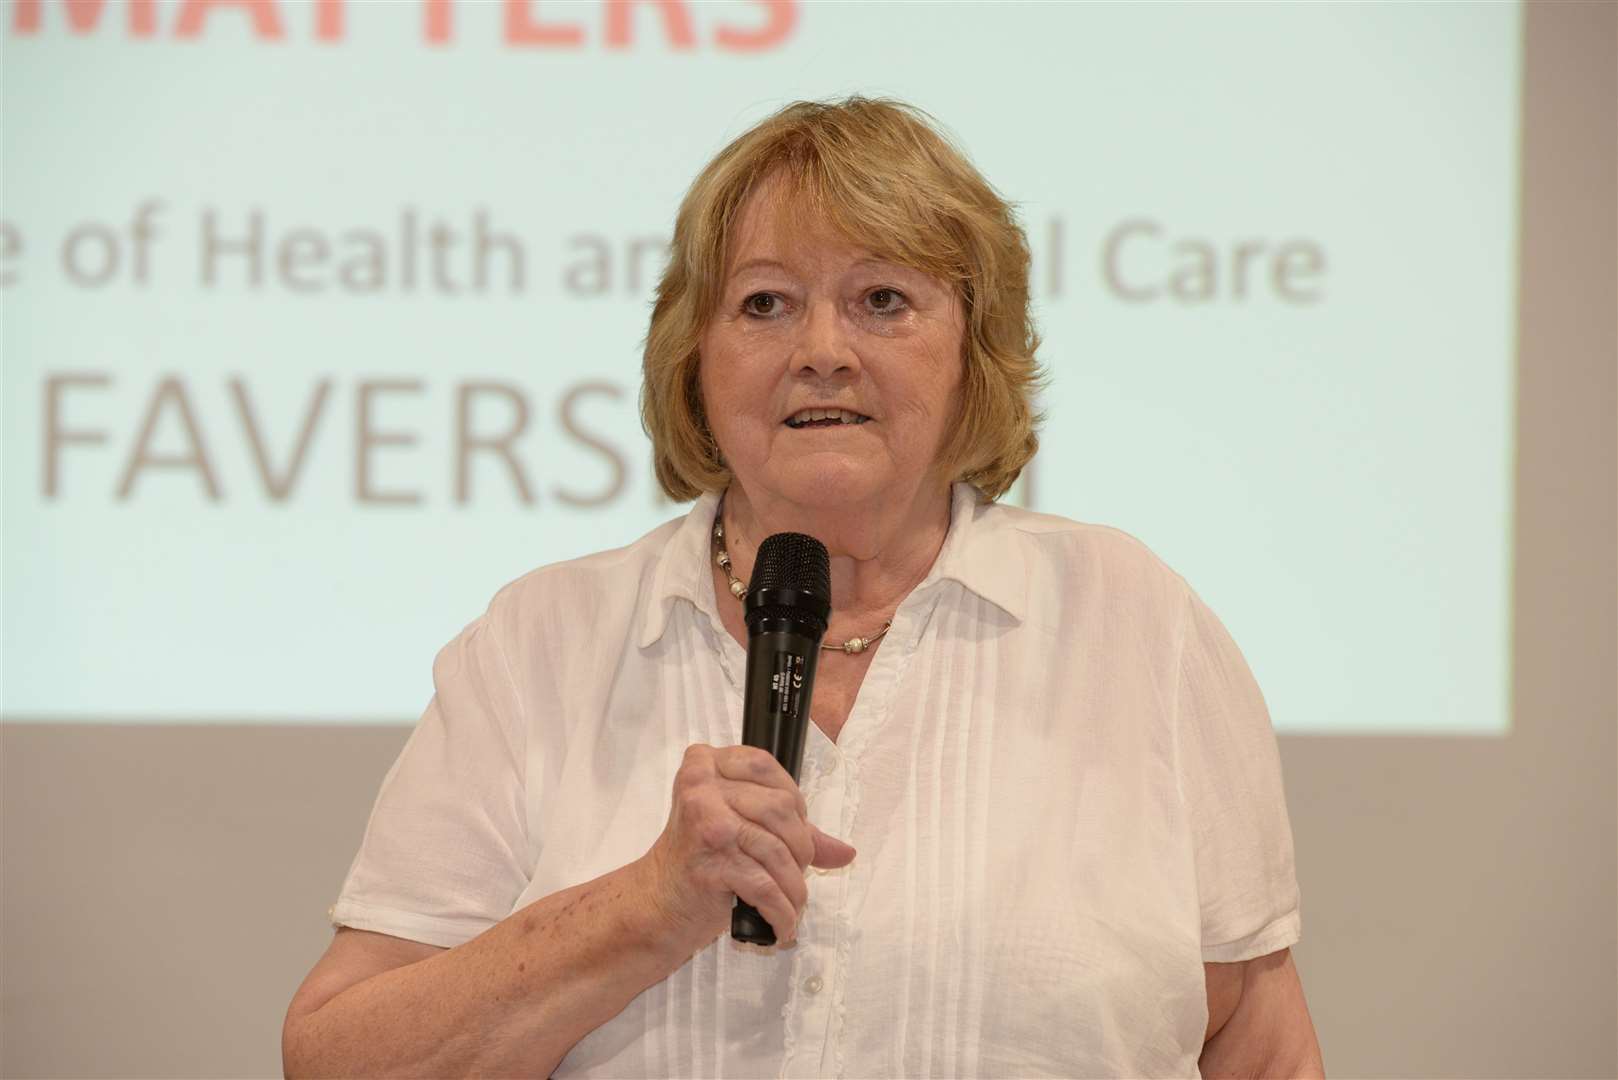 Ms Chester was chair of the Faversham Health Matters group and fought hard for better health services in the town as well as being secretary for the creek bridge steering group